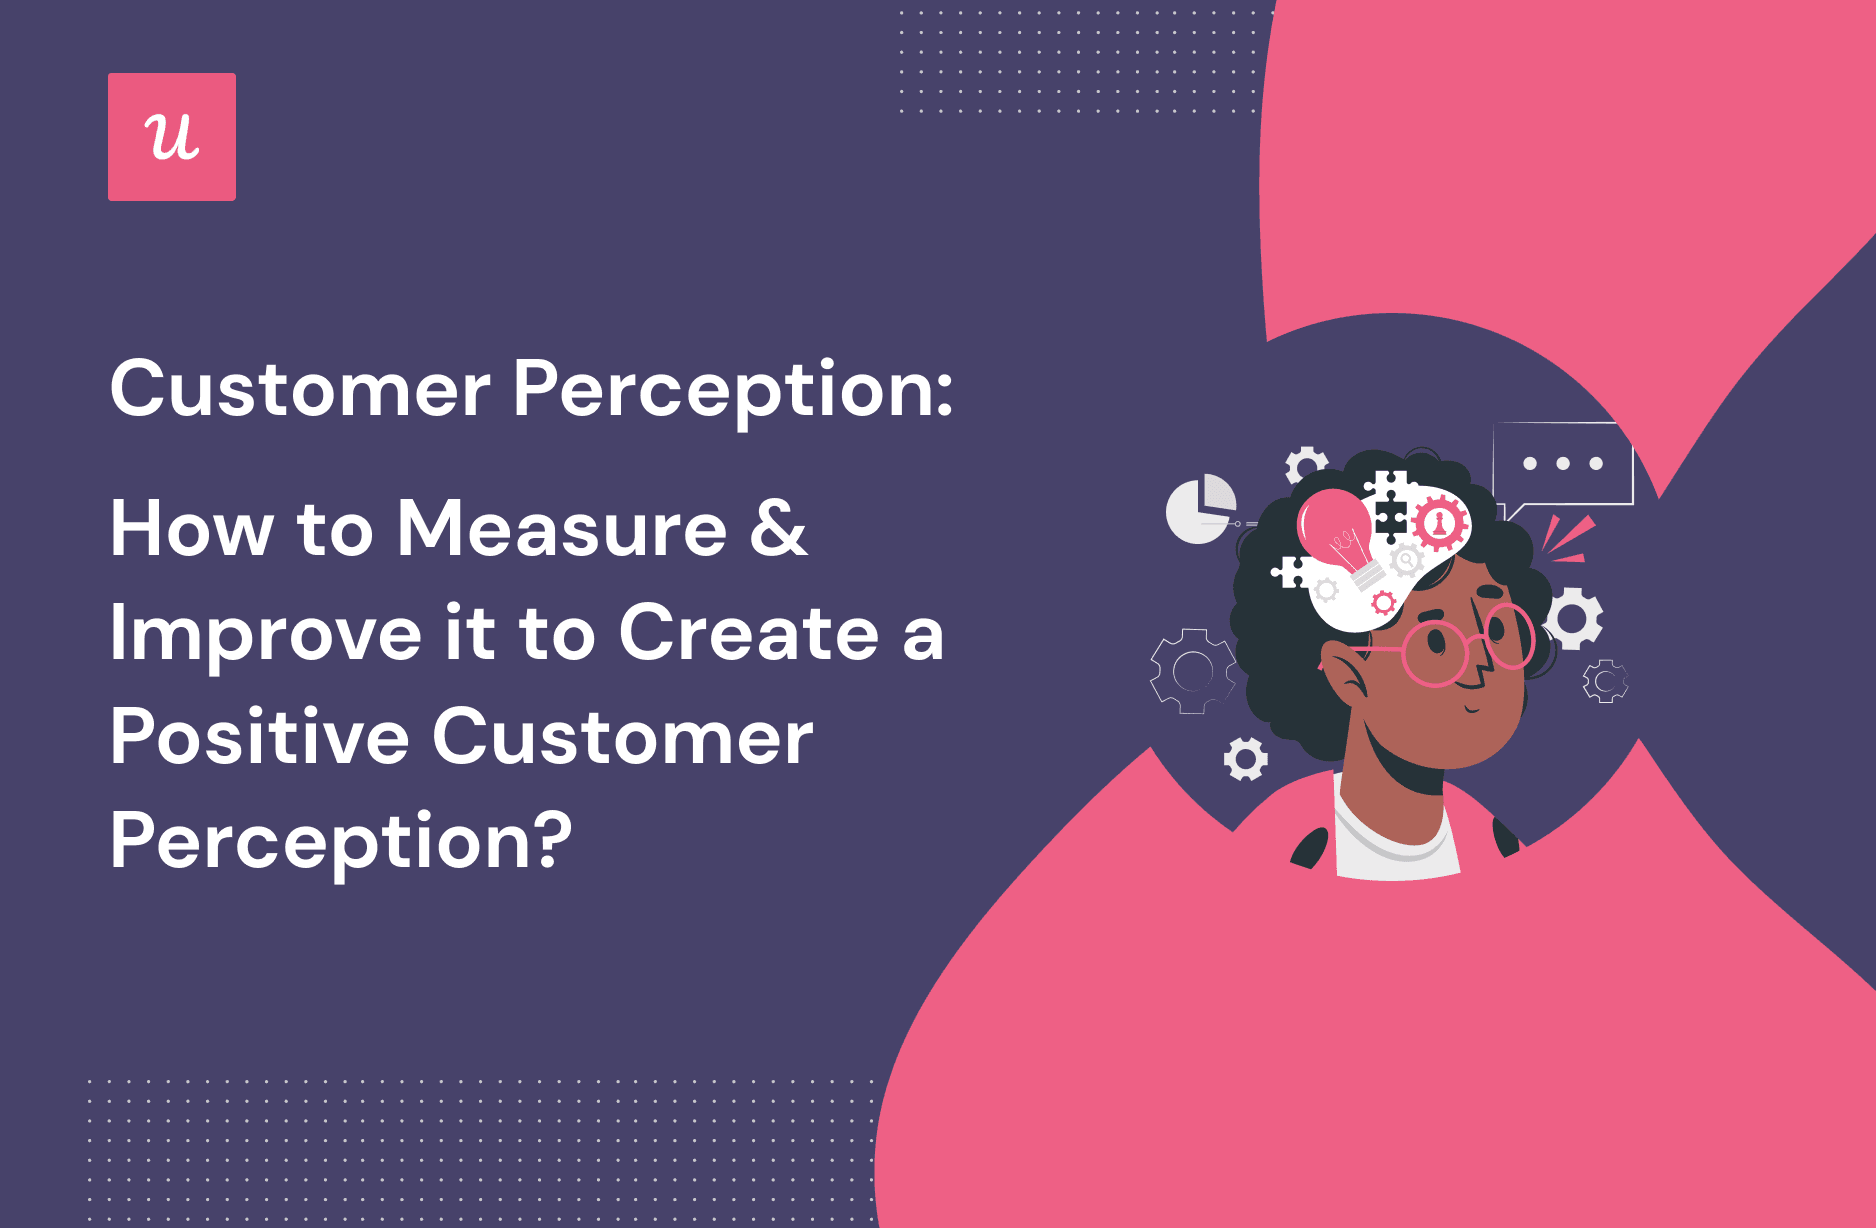 Customer Perception: How To Measure & Improve It To Create a Positive Customer Perception? cover